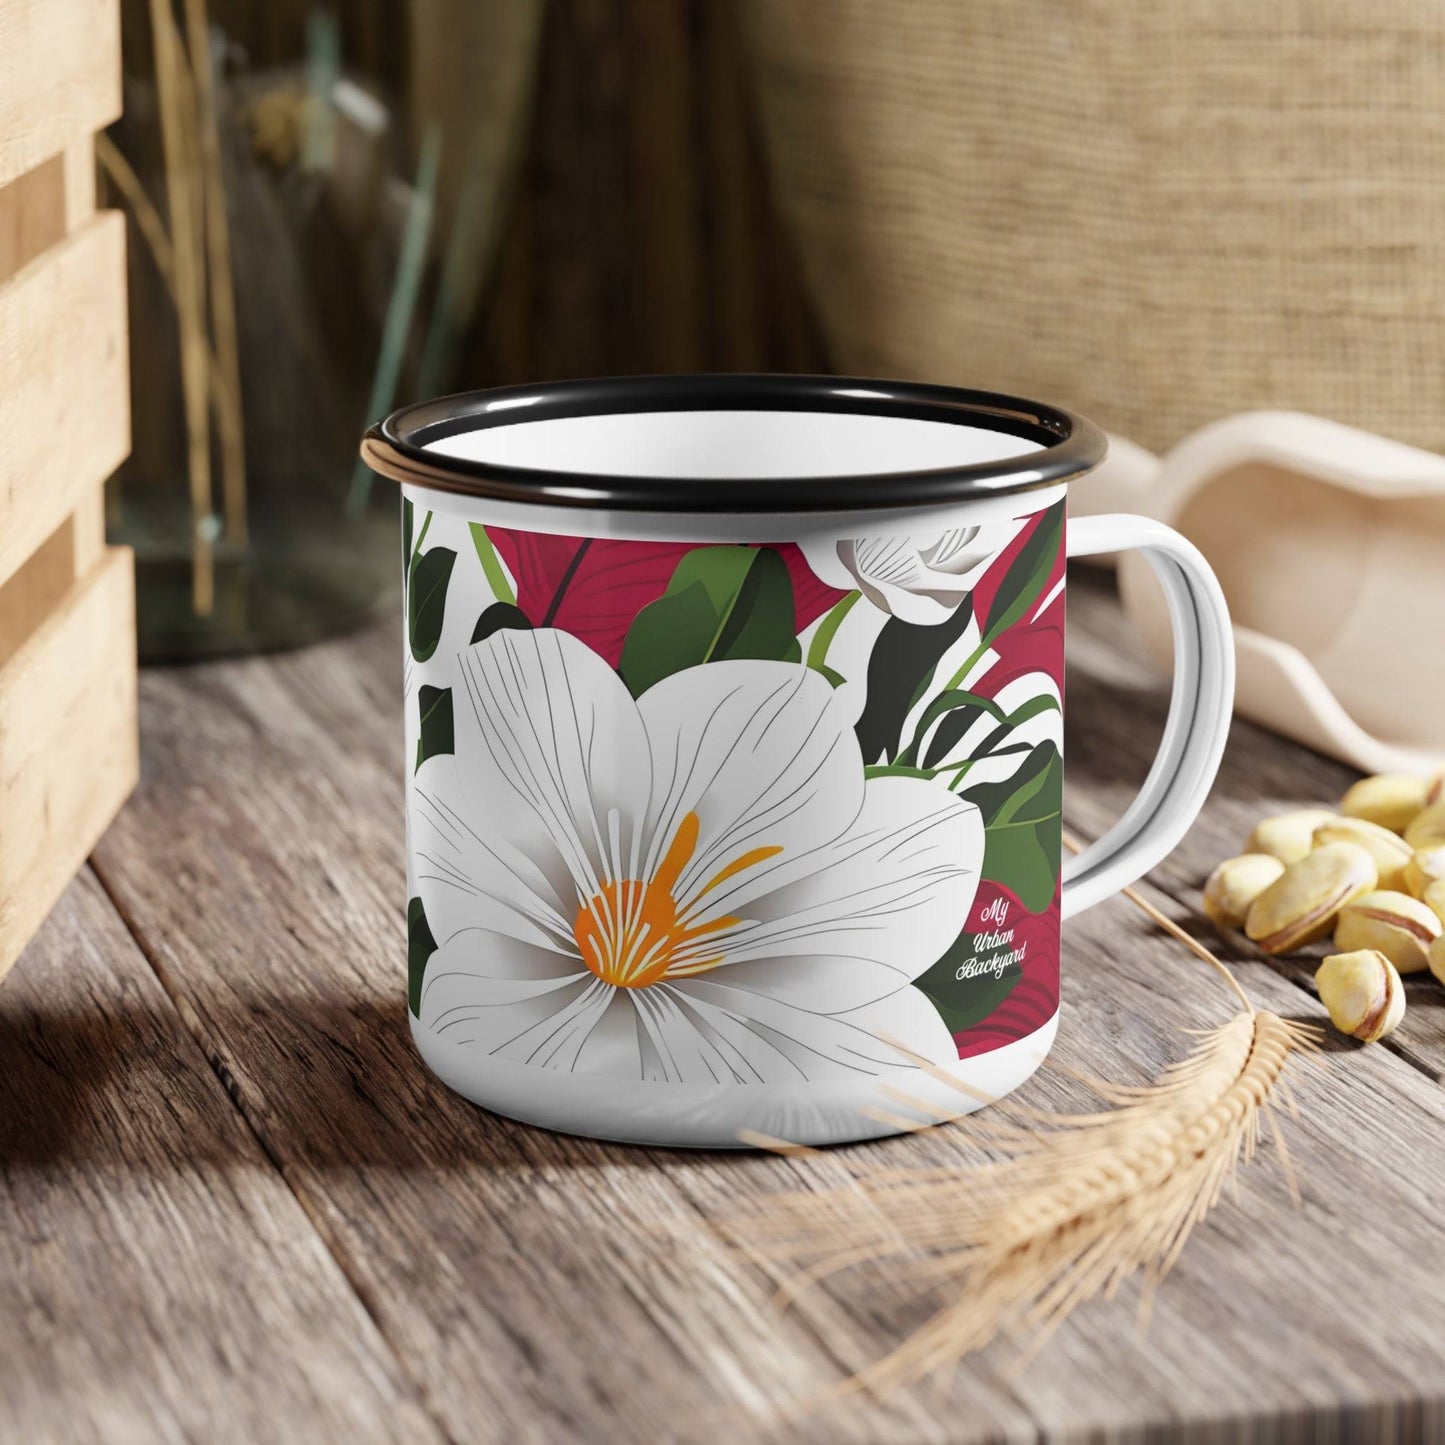 Enamel Camping Mug for Coffee, Tea, Hot Cocoa, Cereal, 12oz, White Flowers on Red